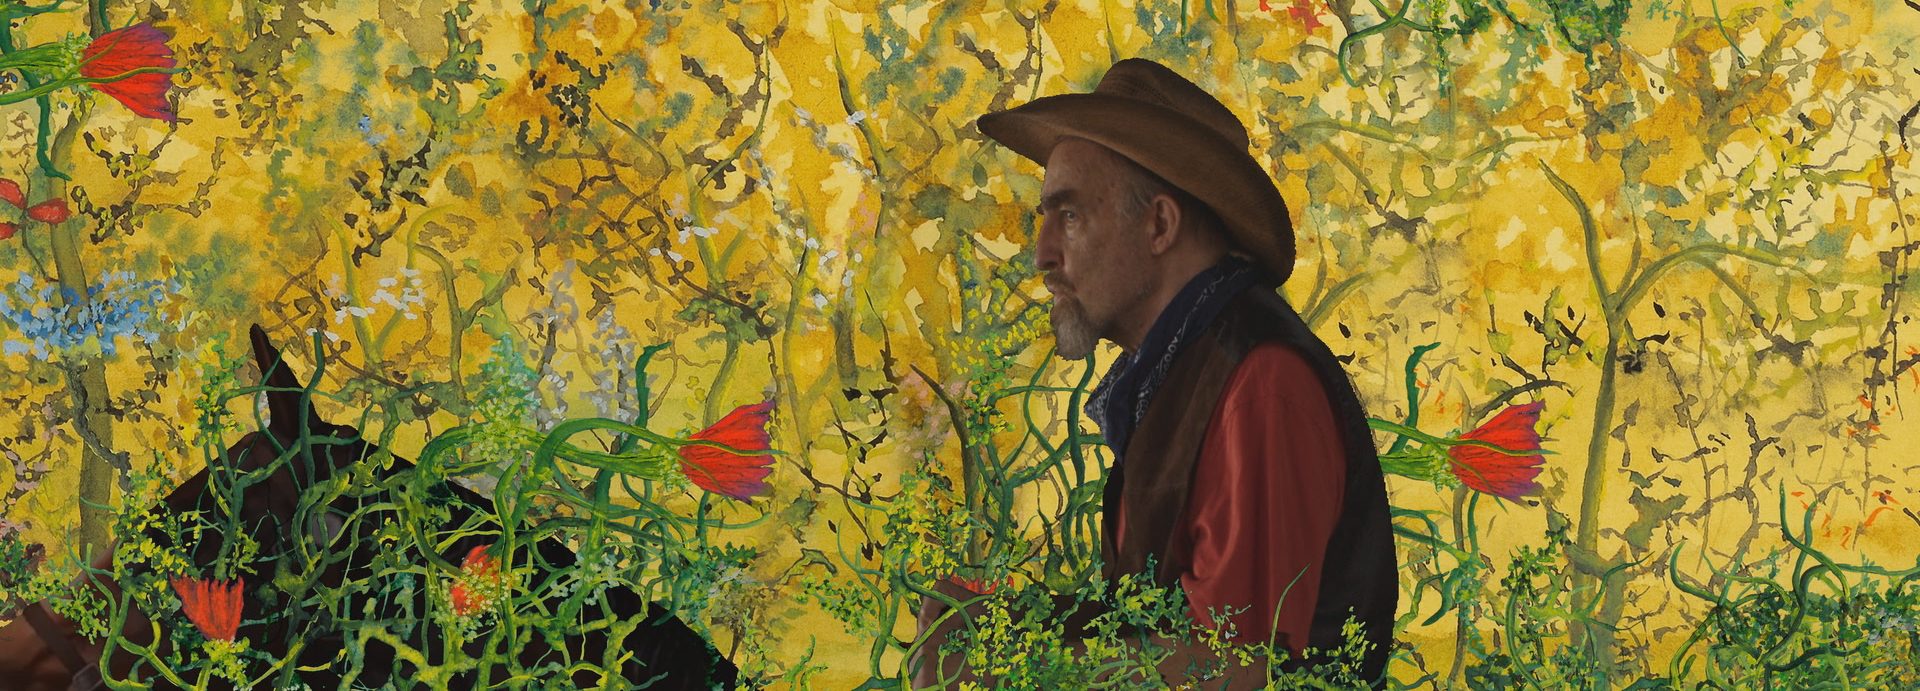 Production still from Painting With John. Image: courtesy of Showmax and HBO